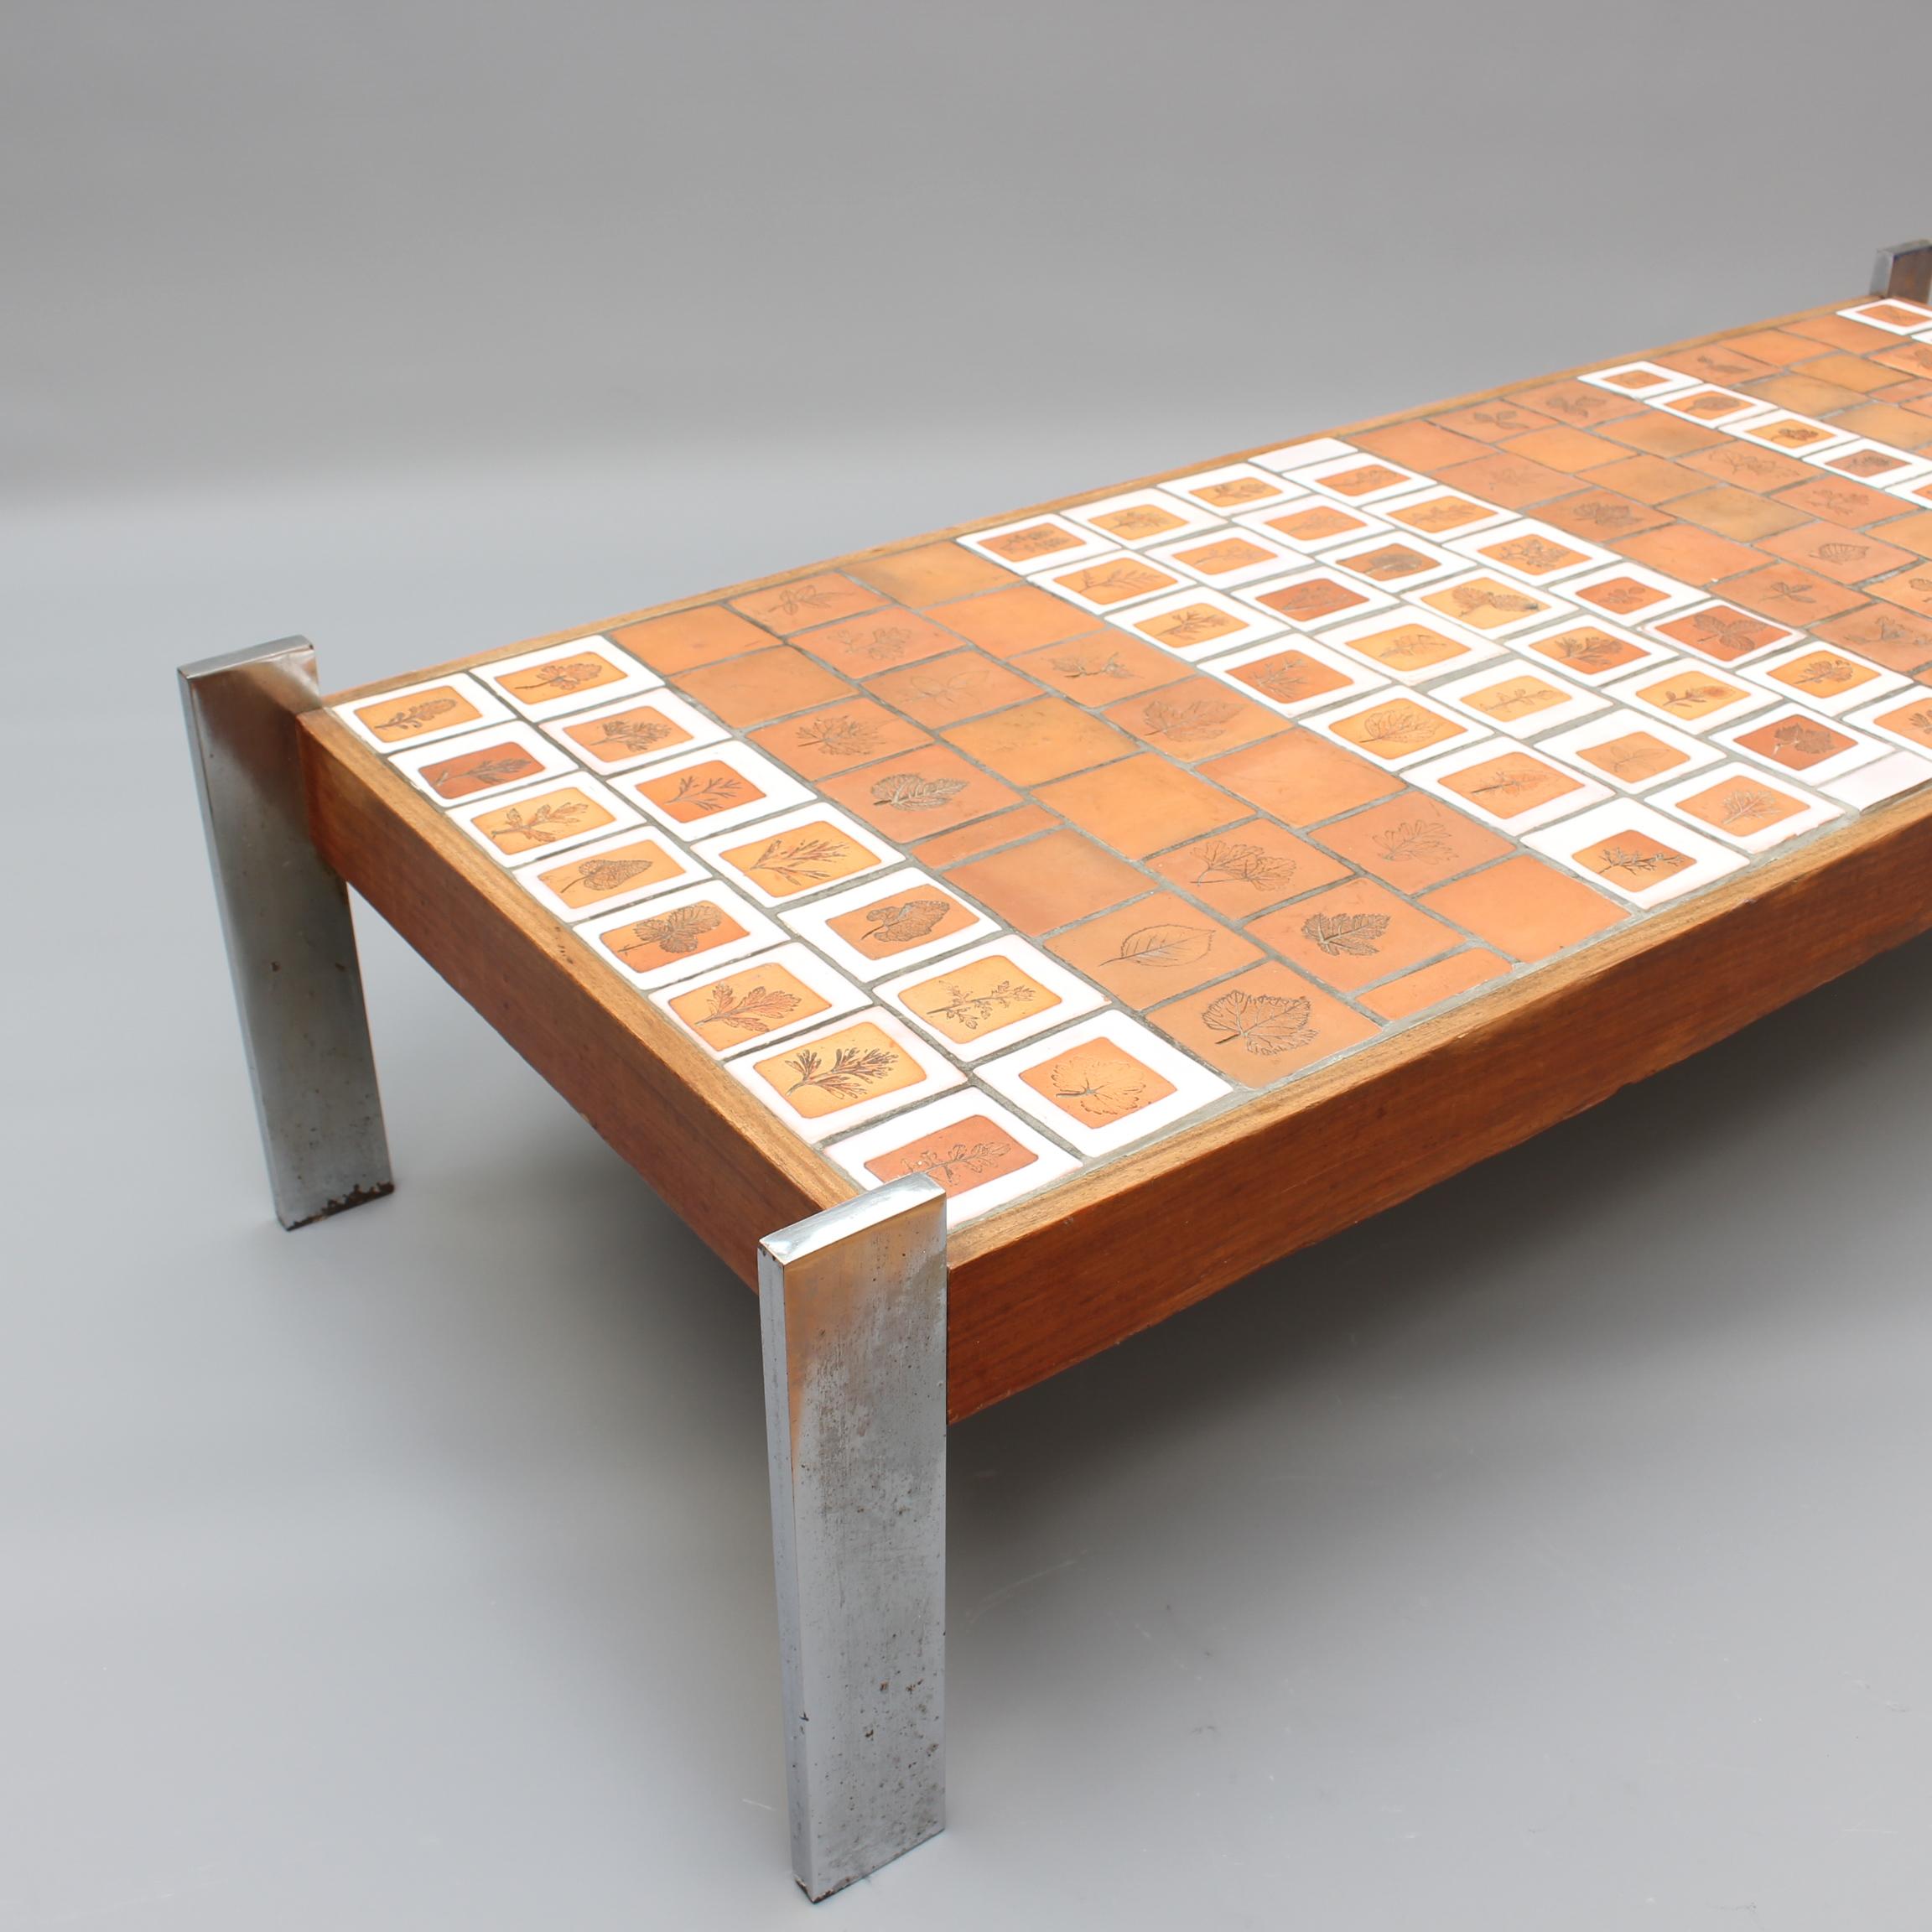 Ceramic Vintage French Coffee Table with Leaf Motif Tiles by Roger Capron (circa 1970s) For Sale